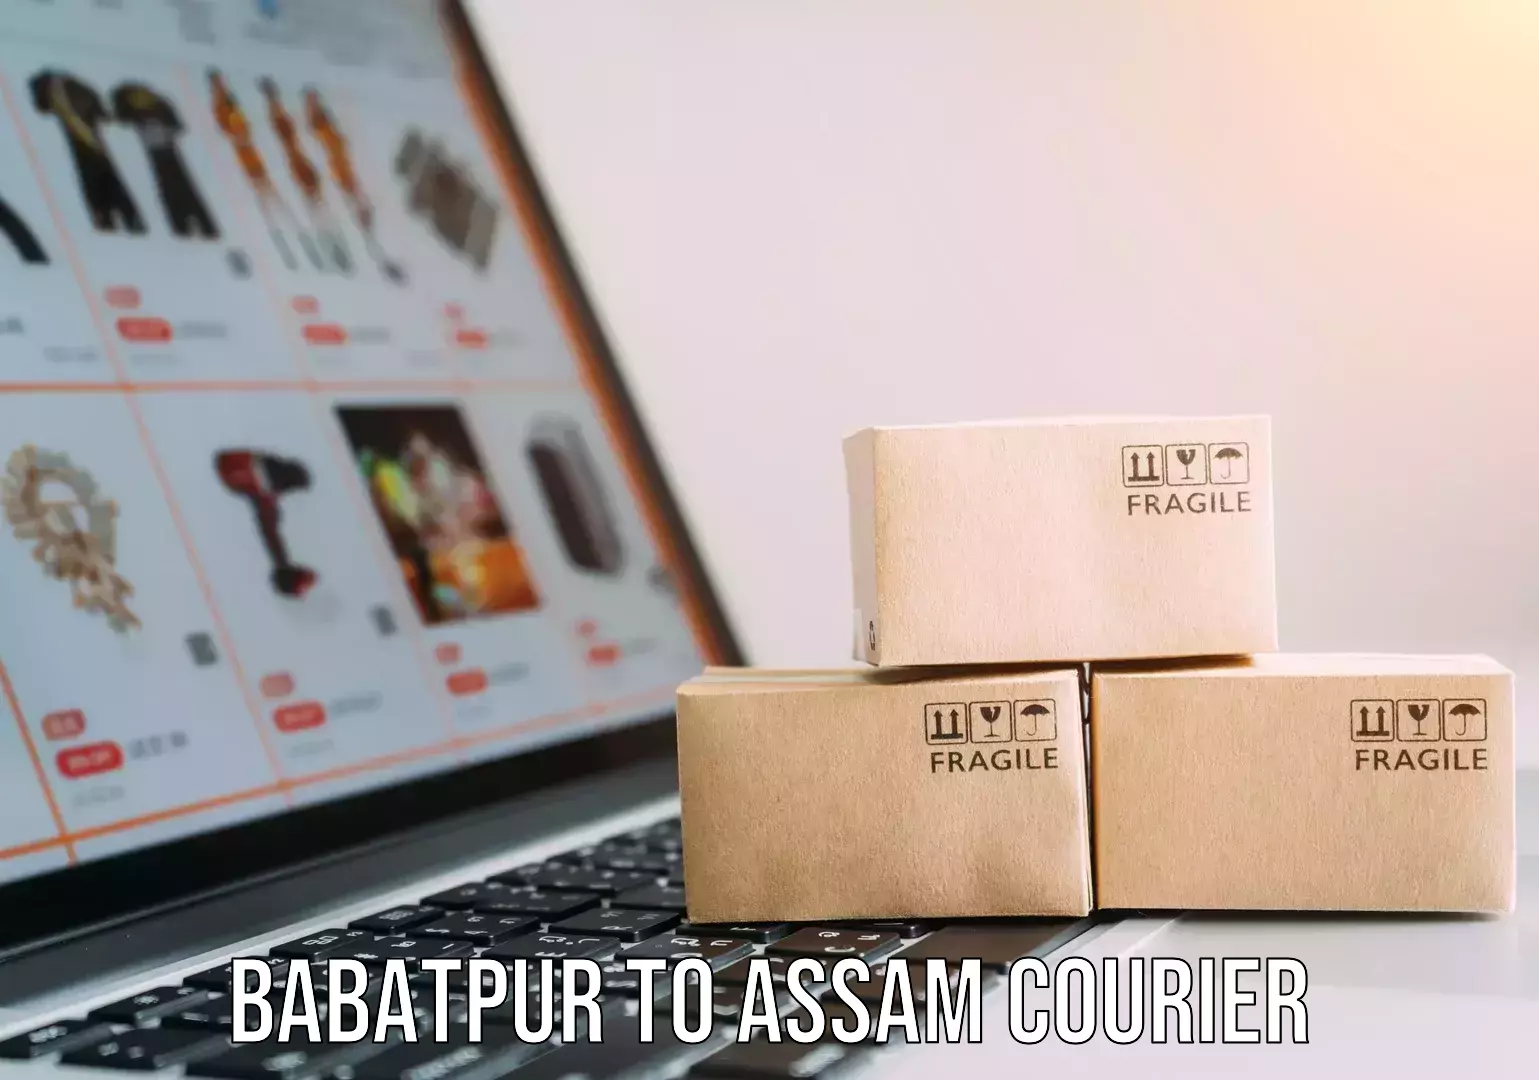 Business delivery service Babatpur to Assam